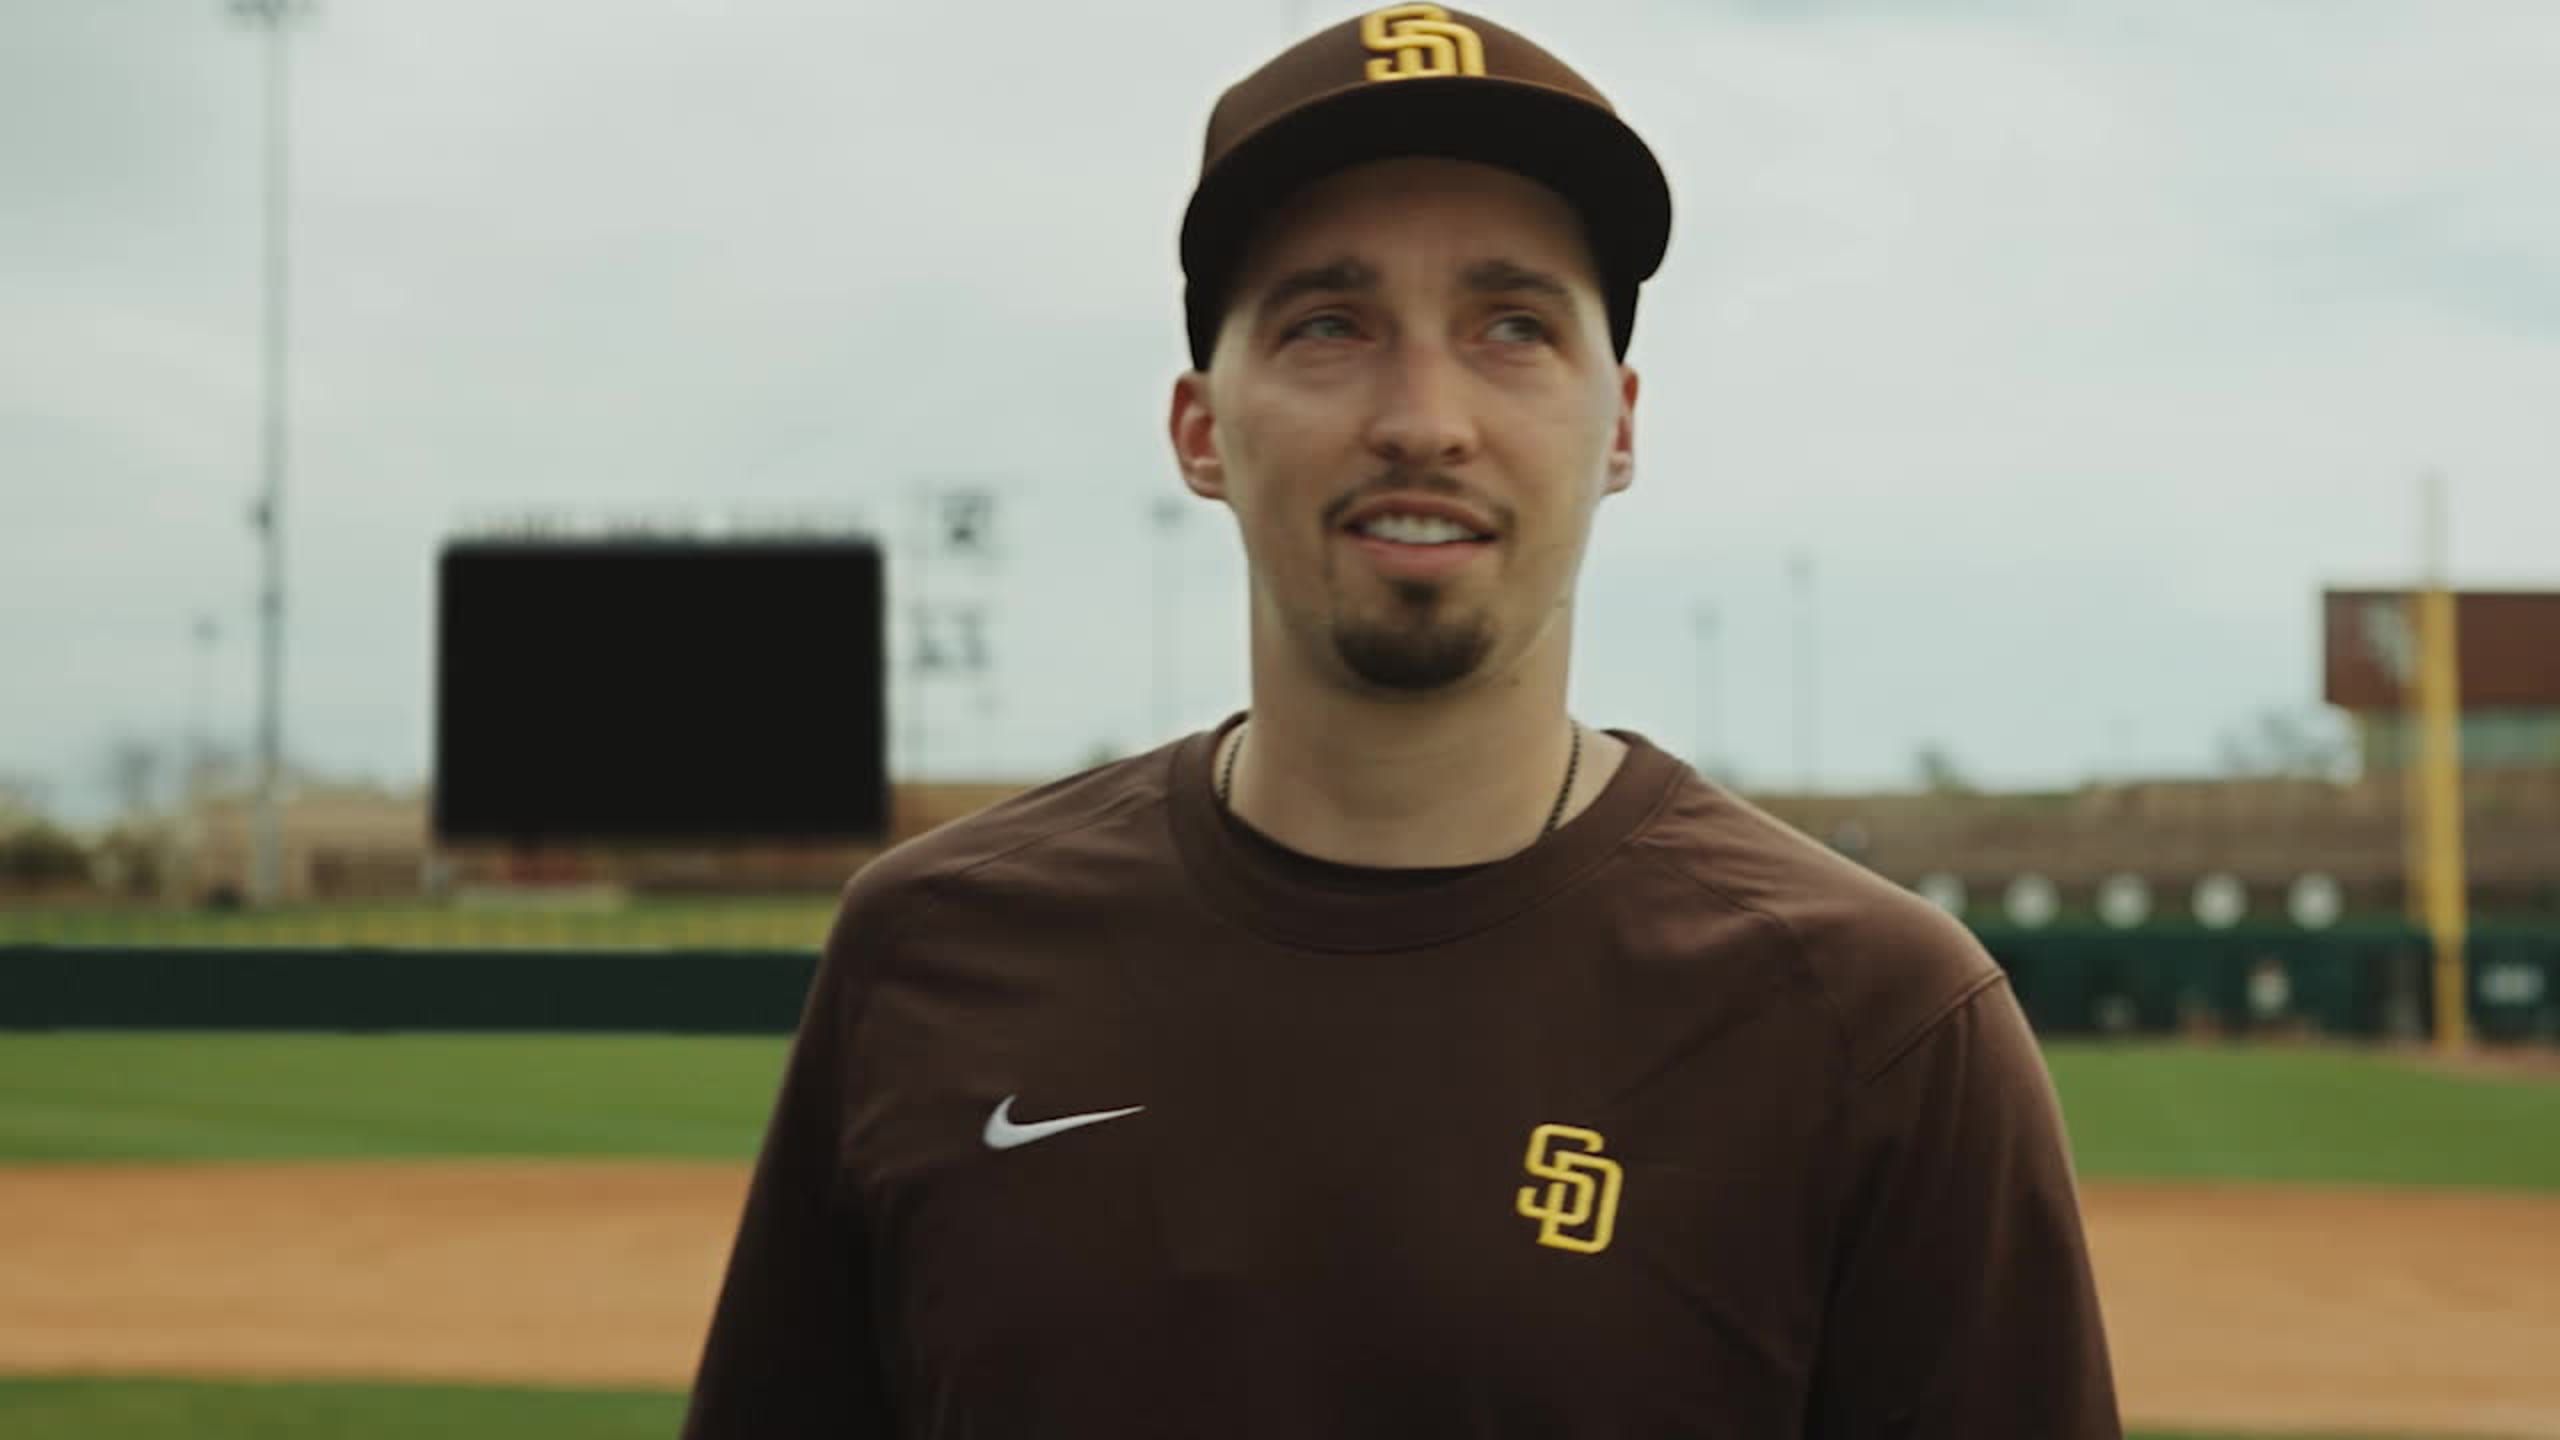 Padres to become first MLB team to feature ads on uniforms